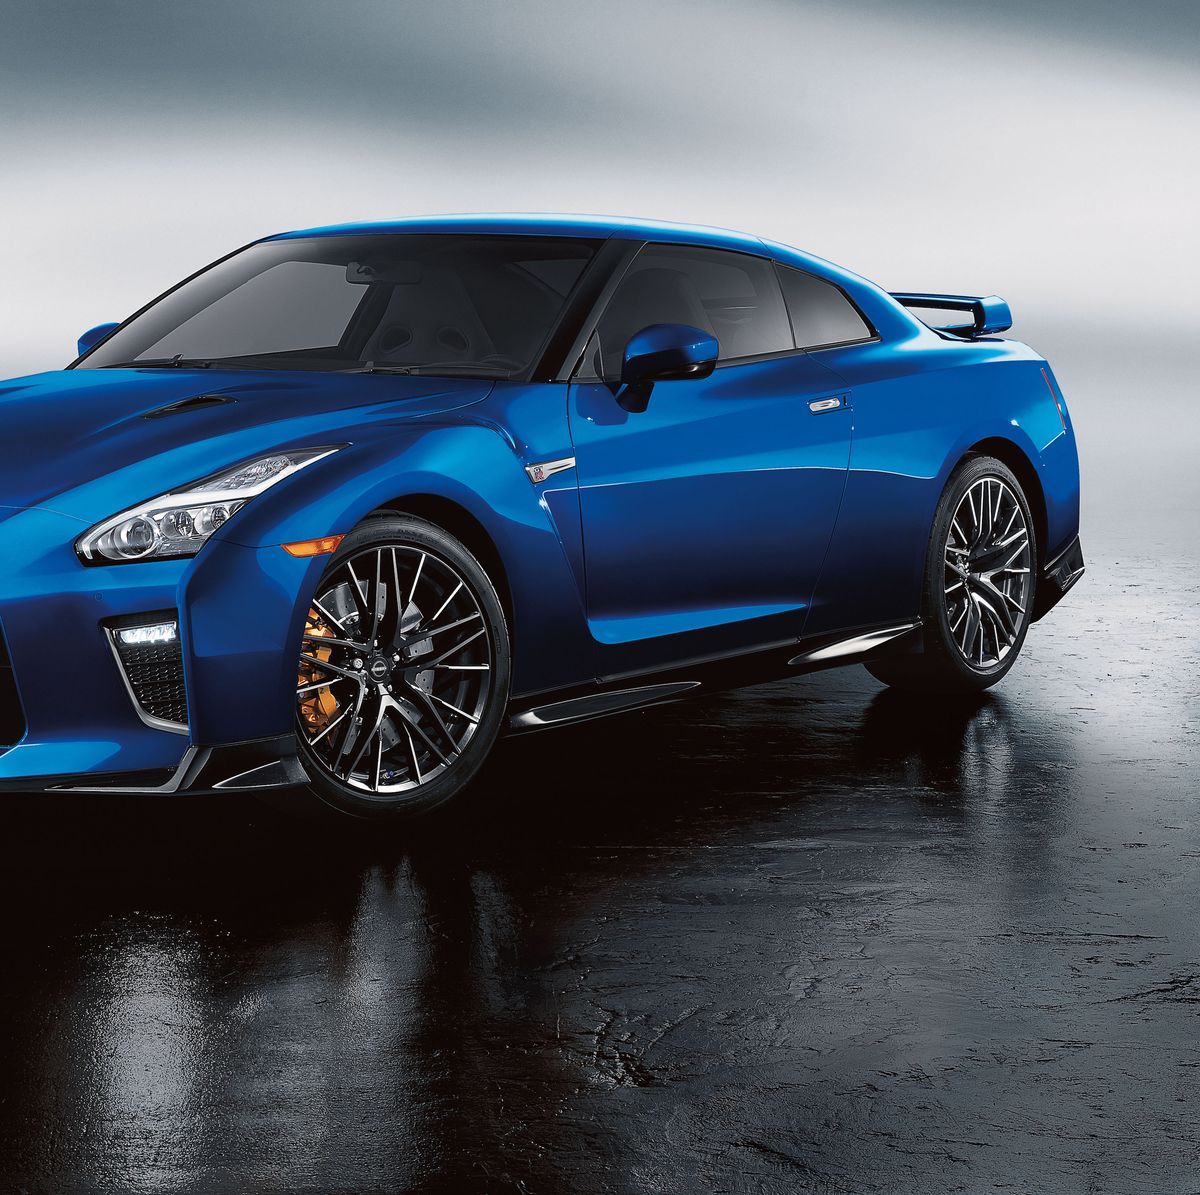 New Nissan GT-R in Development, Might Not Even Be a Hybrid: Report